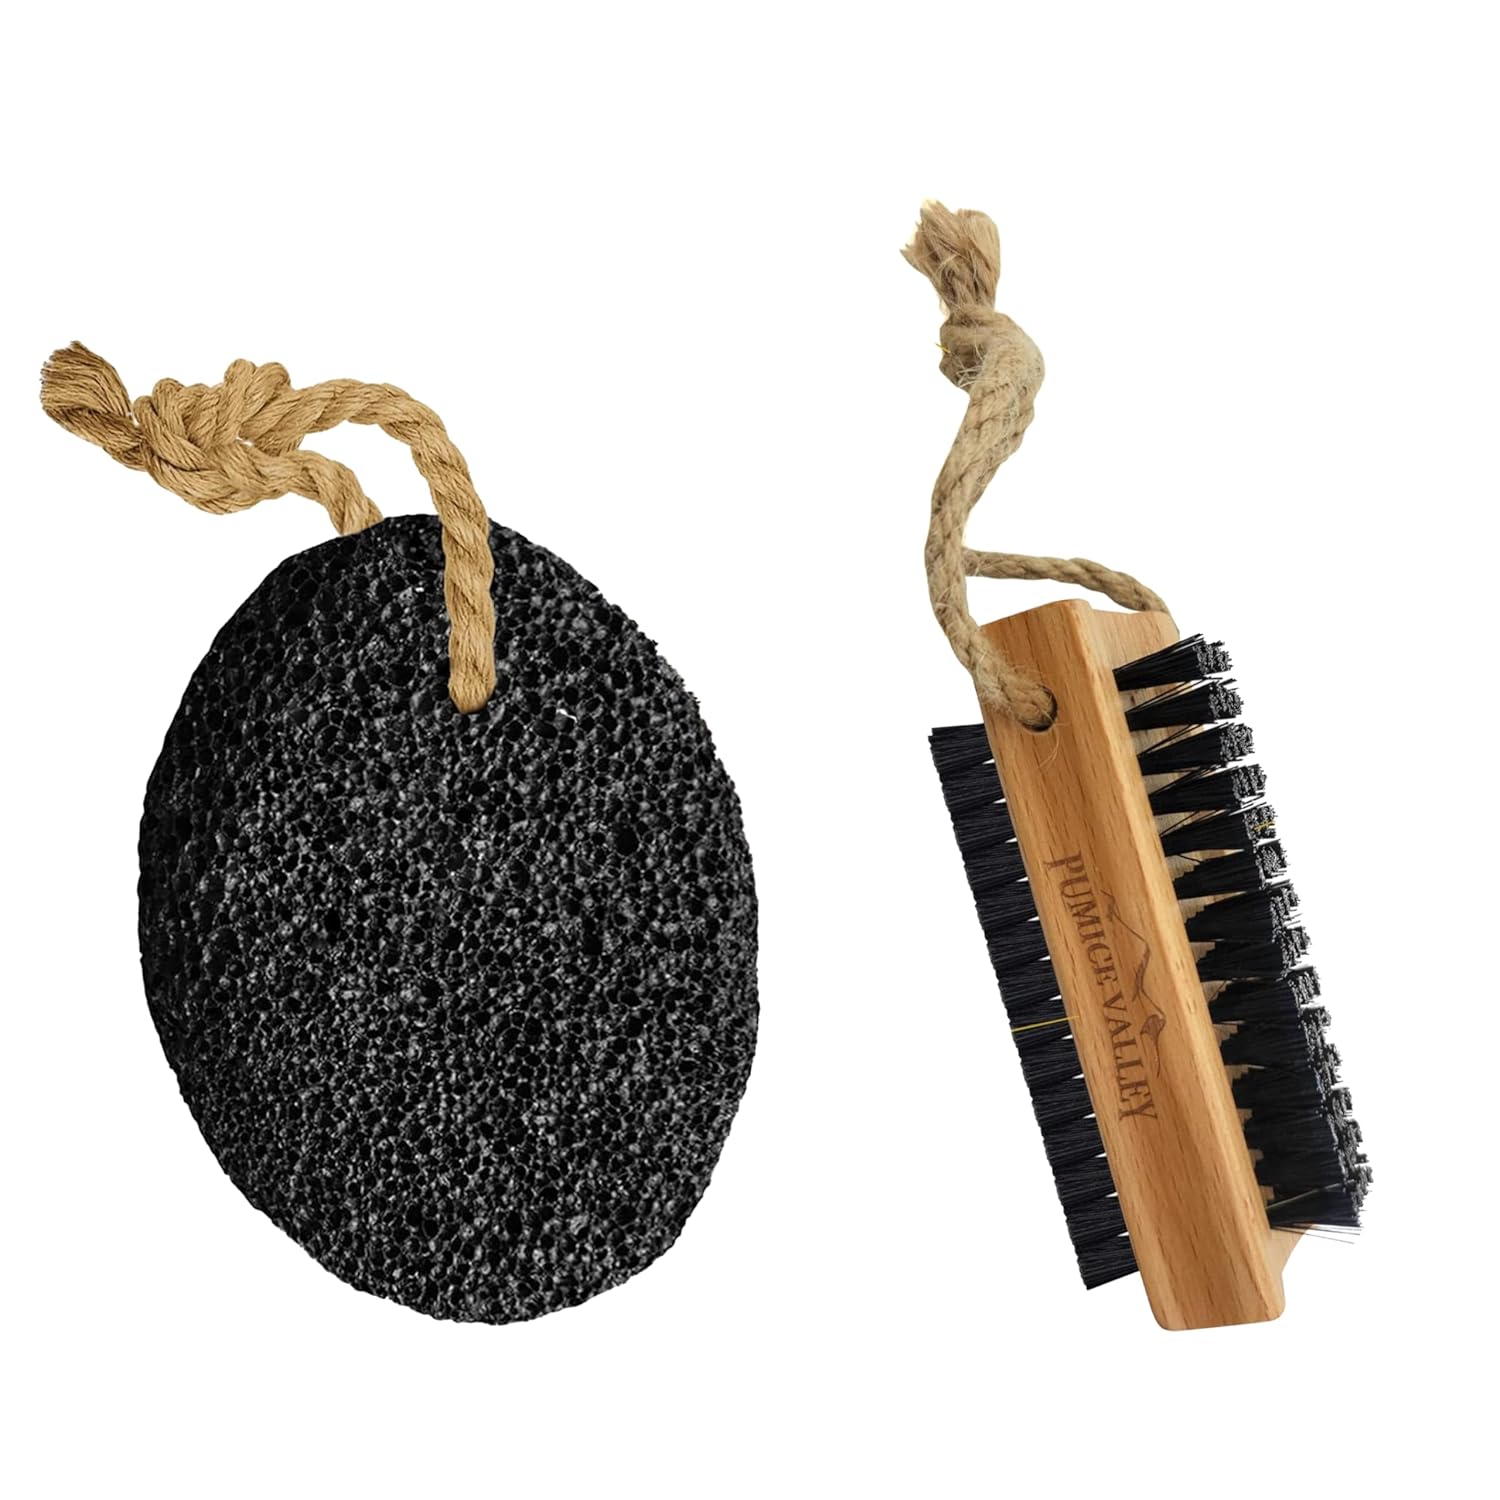 Wooden Cleaning Finger Nail Brush & Pumice Stone